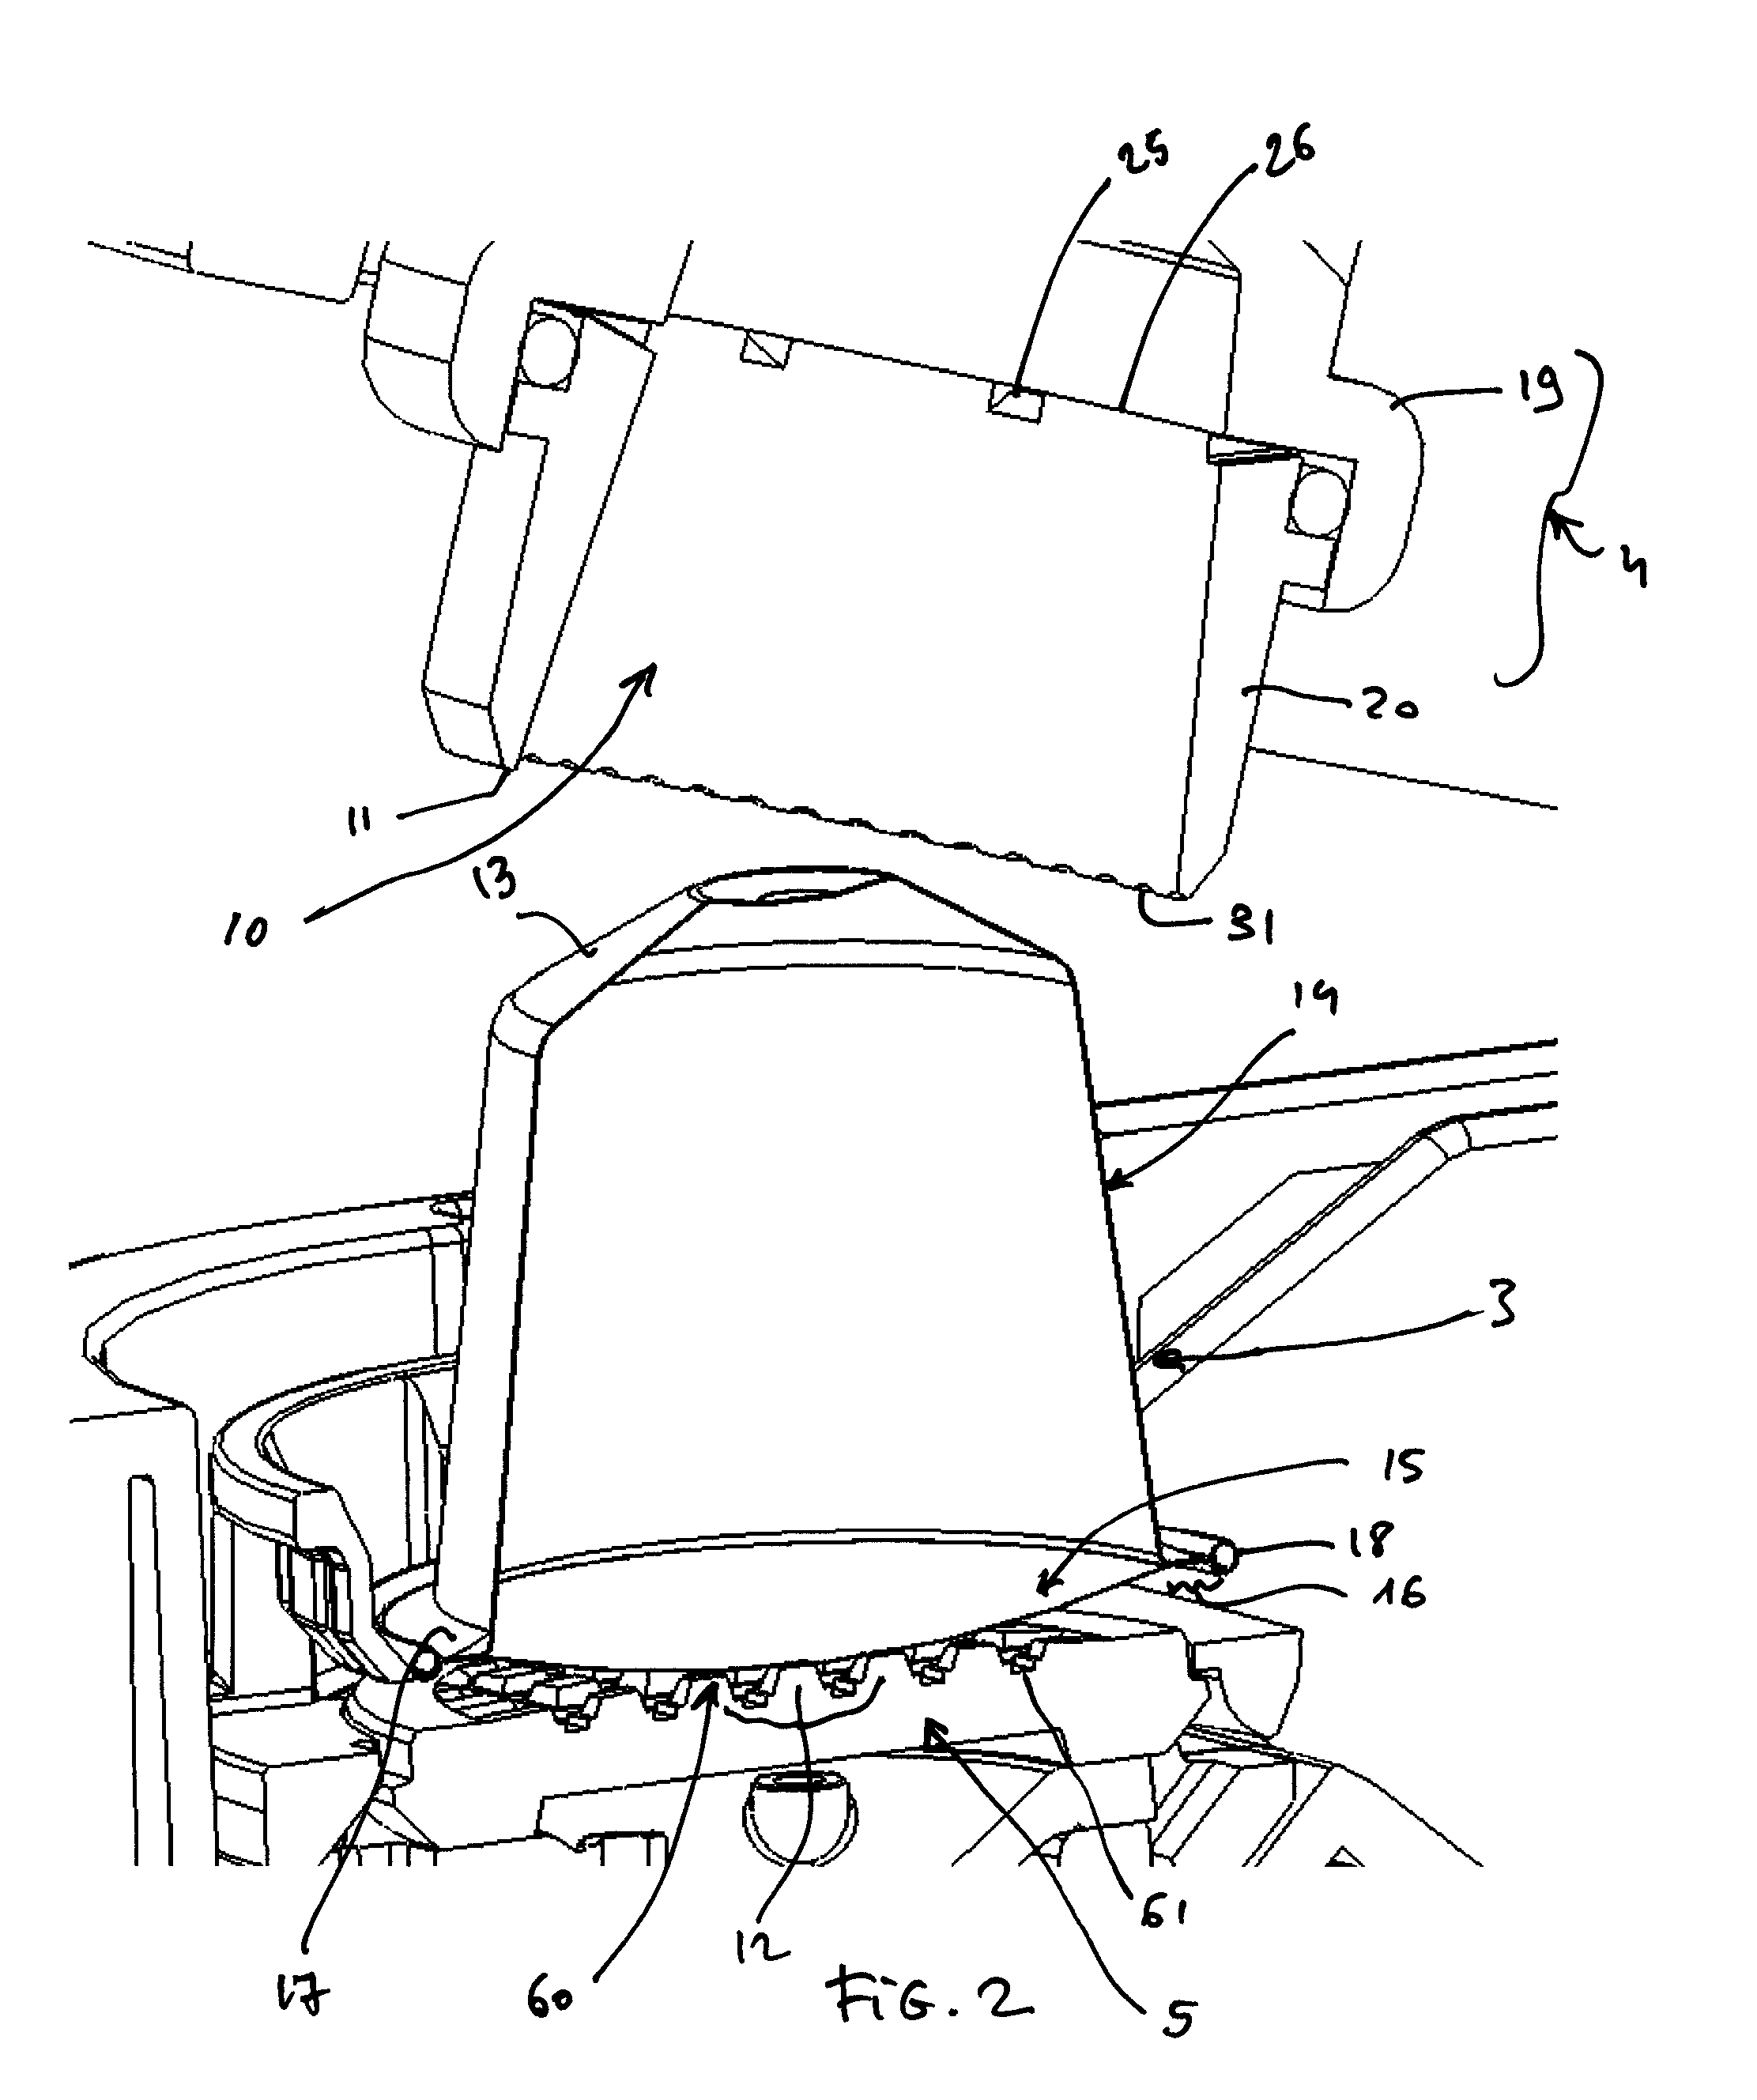 Extraction system for the preparation of a beverage from a cartridge